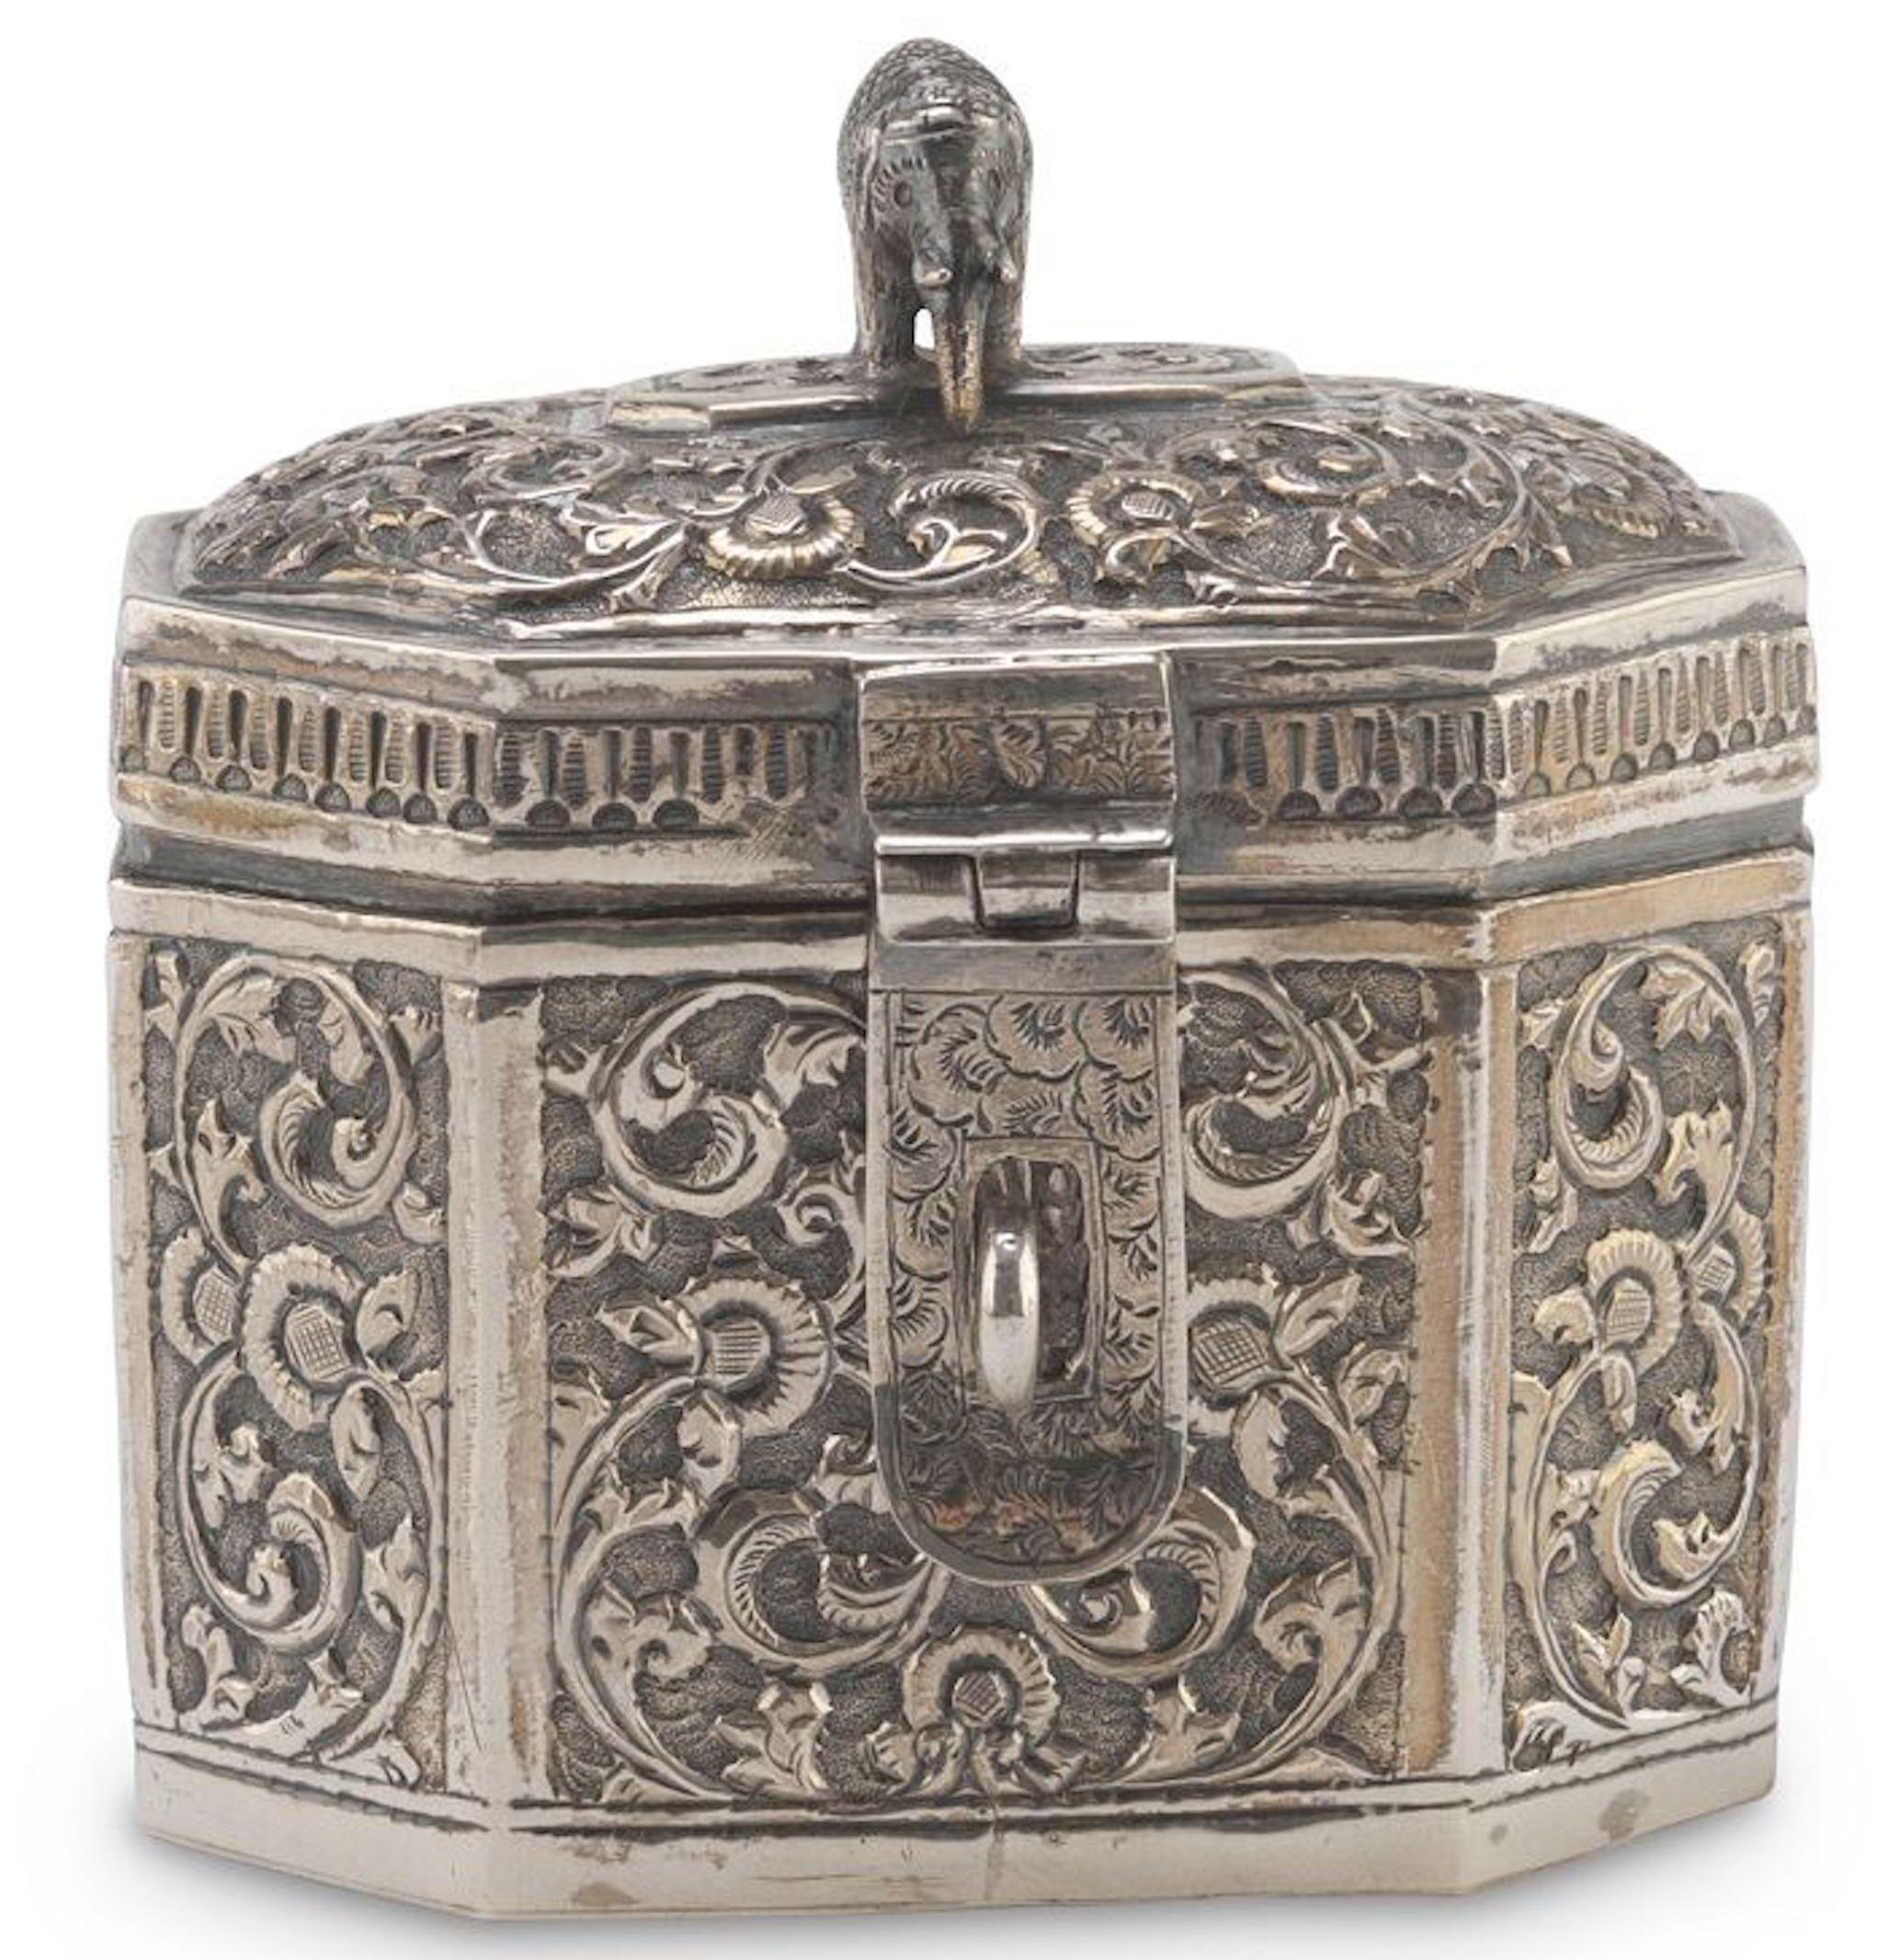 Silverplate box is an original decorative object realized in the early 20th century.

Original silverpalted metal box. 

Excellent conditions. 

Beautiful silver box made in India. The surfaces are decorated with plant motifs and a cover